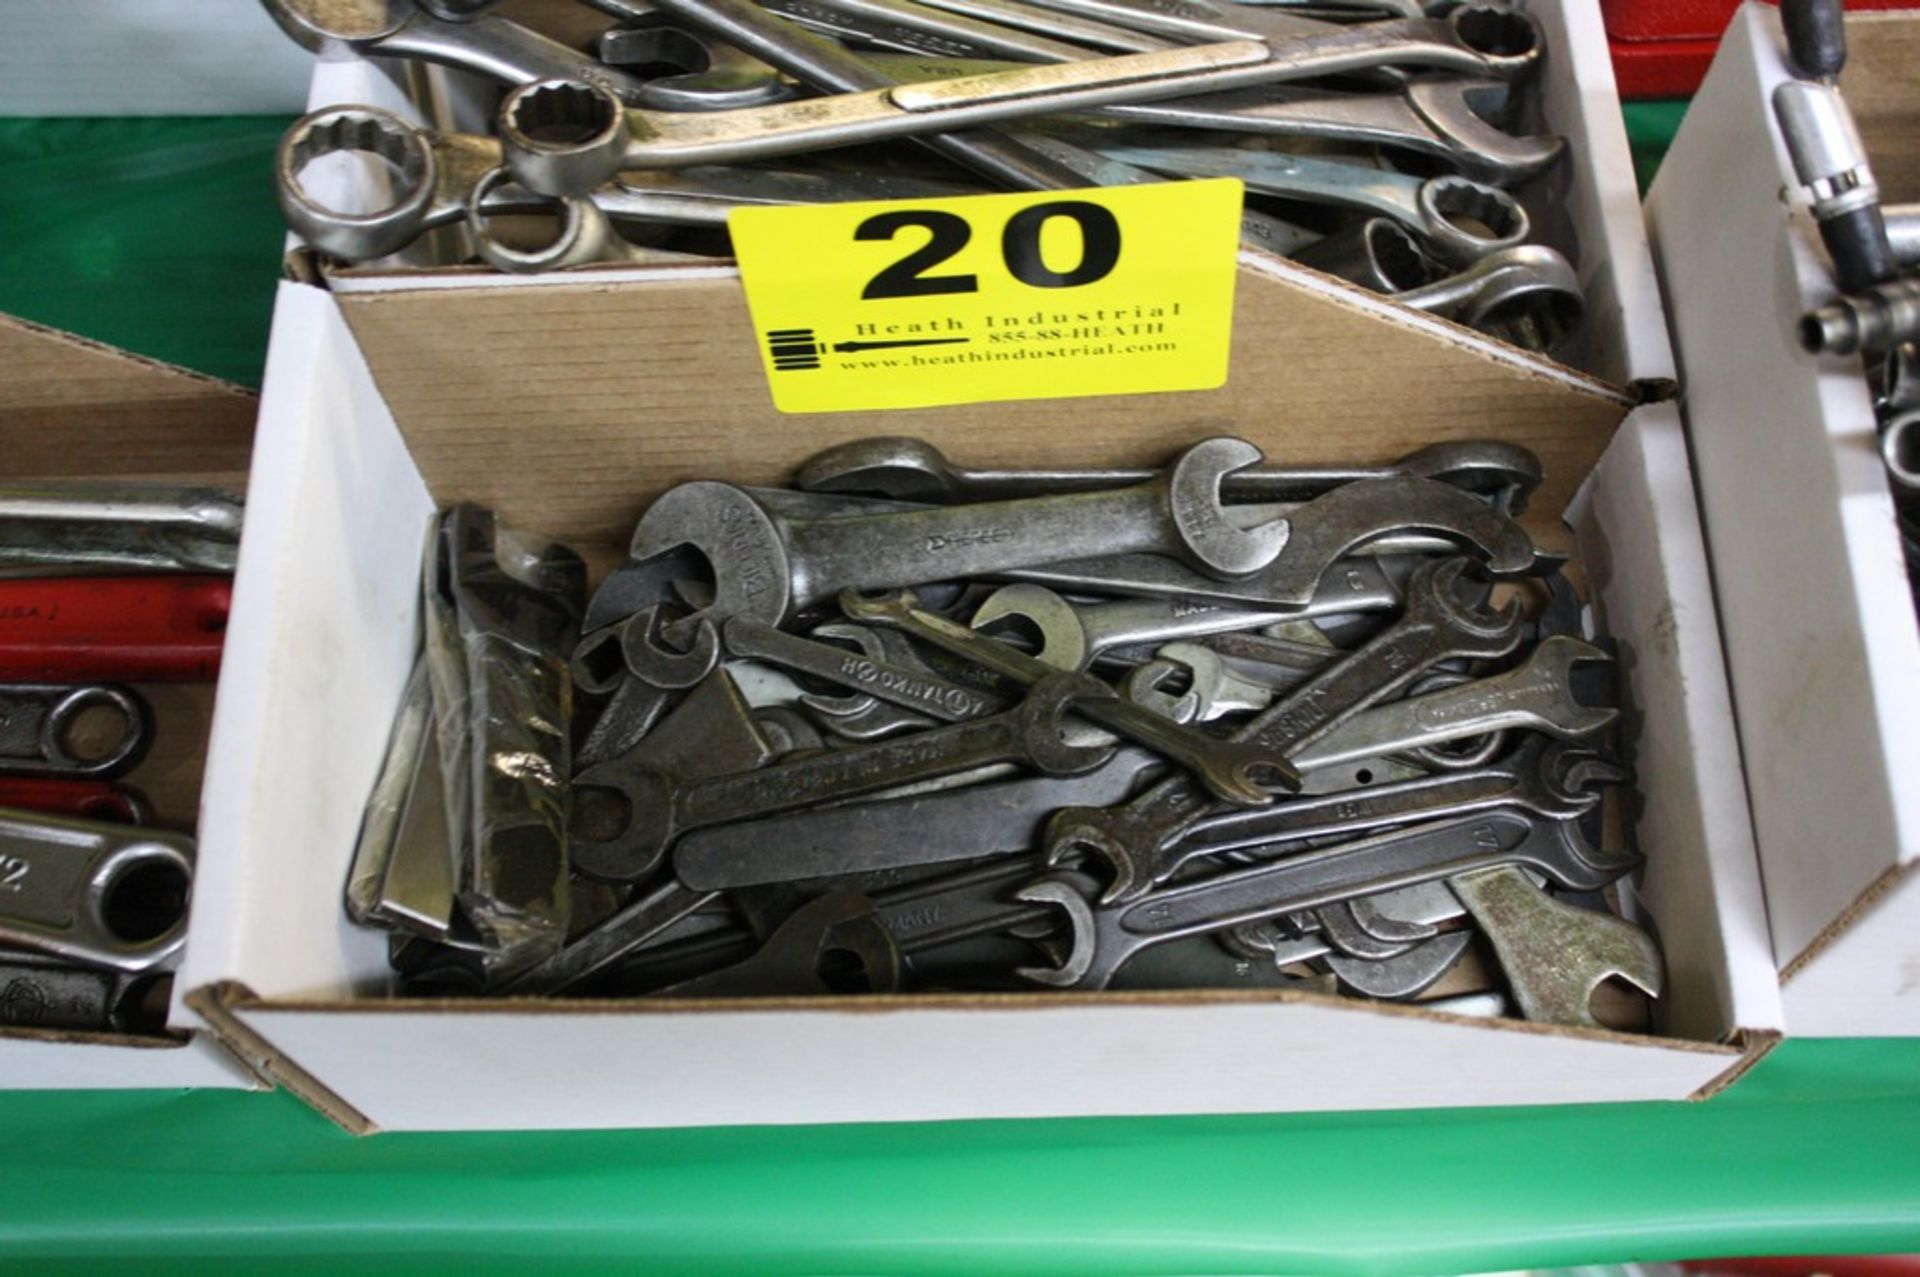 LARGE ASSORTMENT OF OPEN END WRENCHES IN BOX